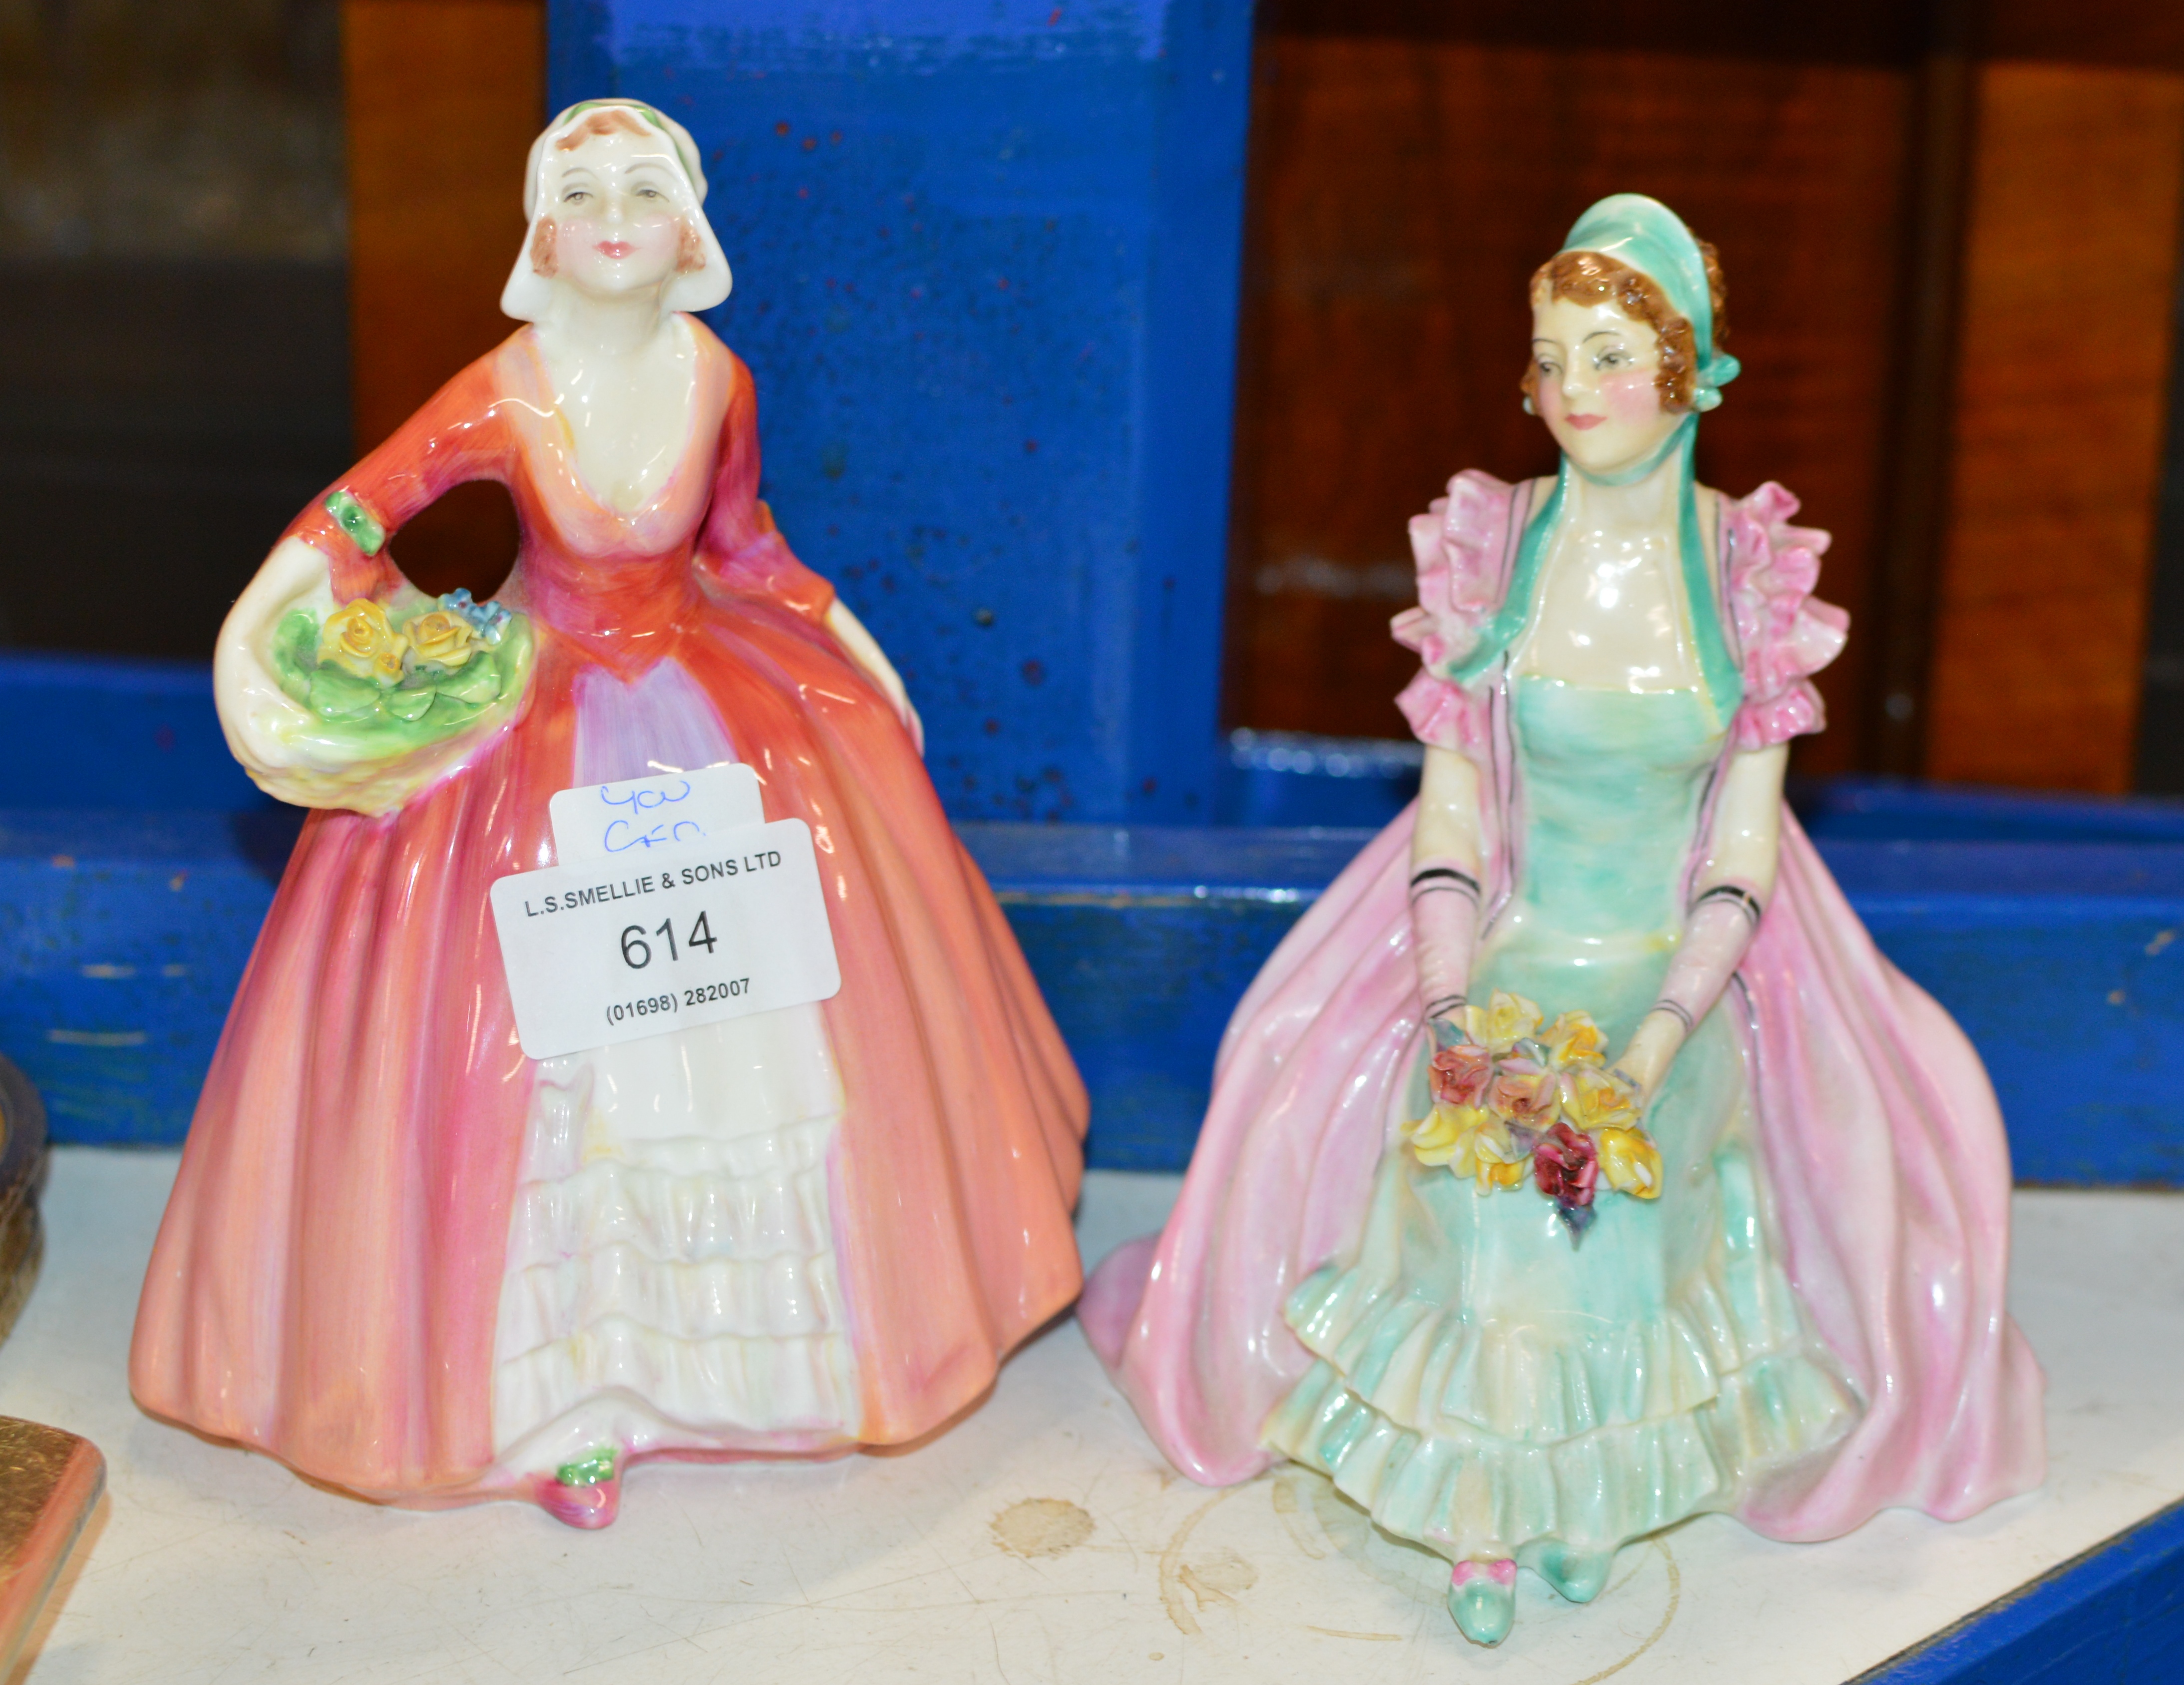 OLD ROYAL DOULTON FIGURINE CYNTHIA HN1685 AND 1 OTHER DOULTON FIGURINE